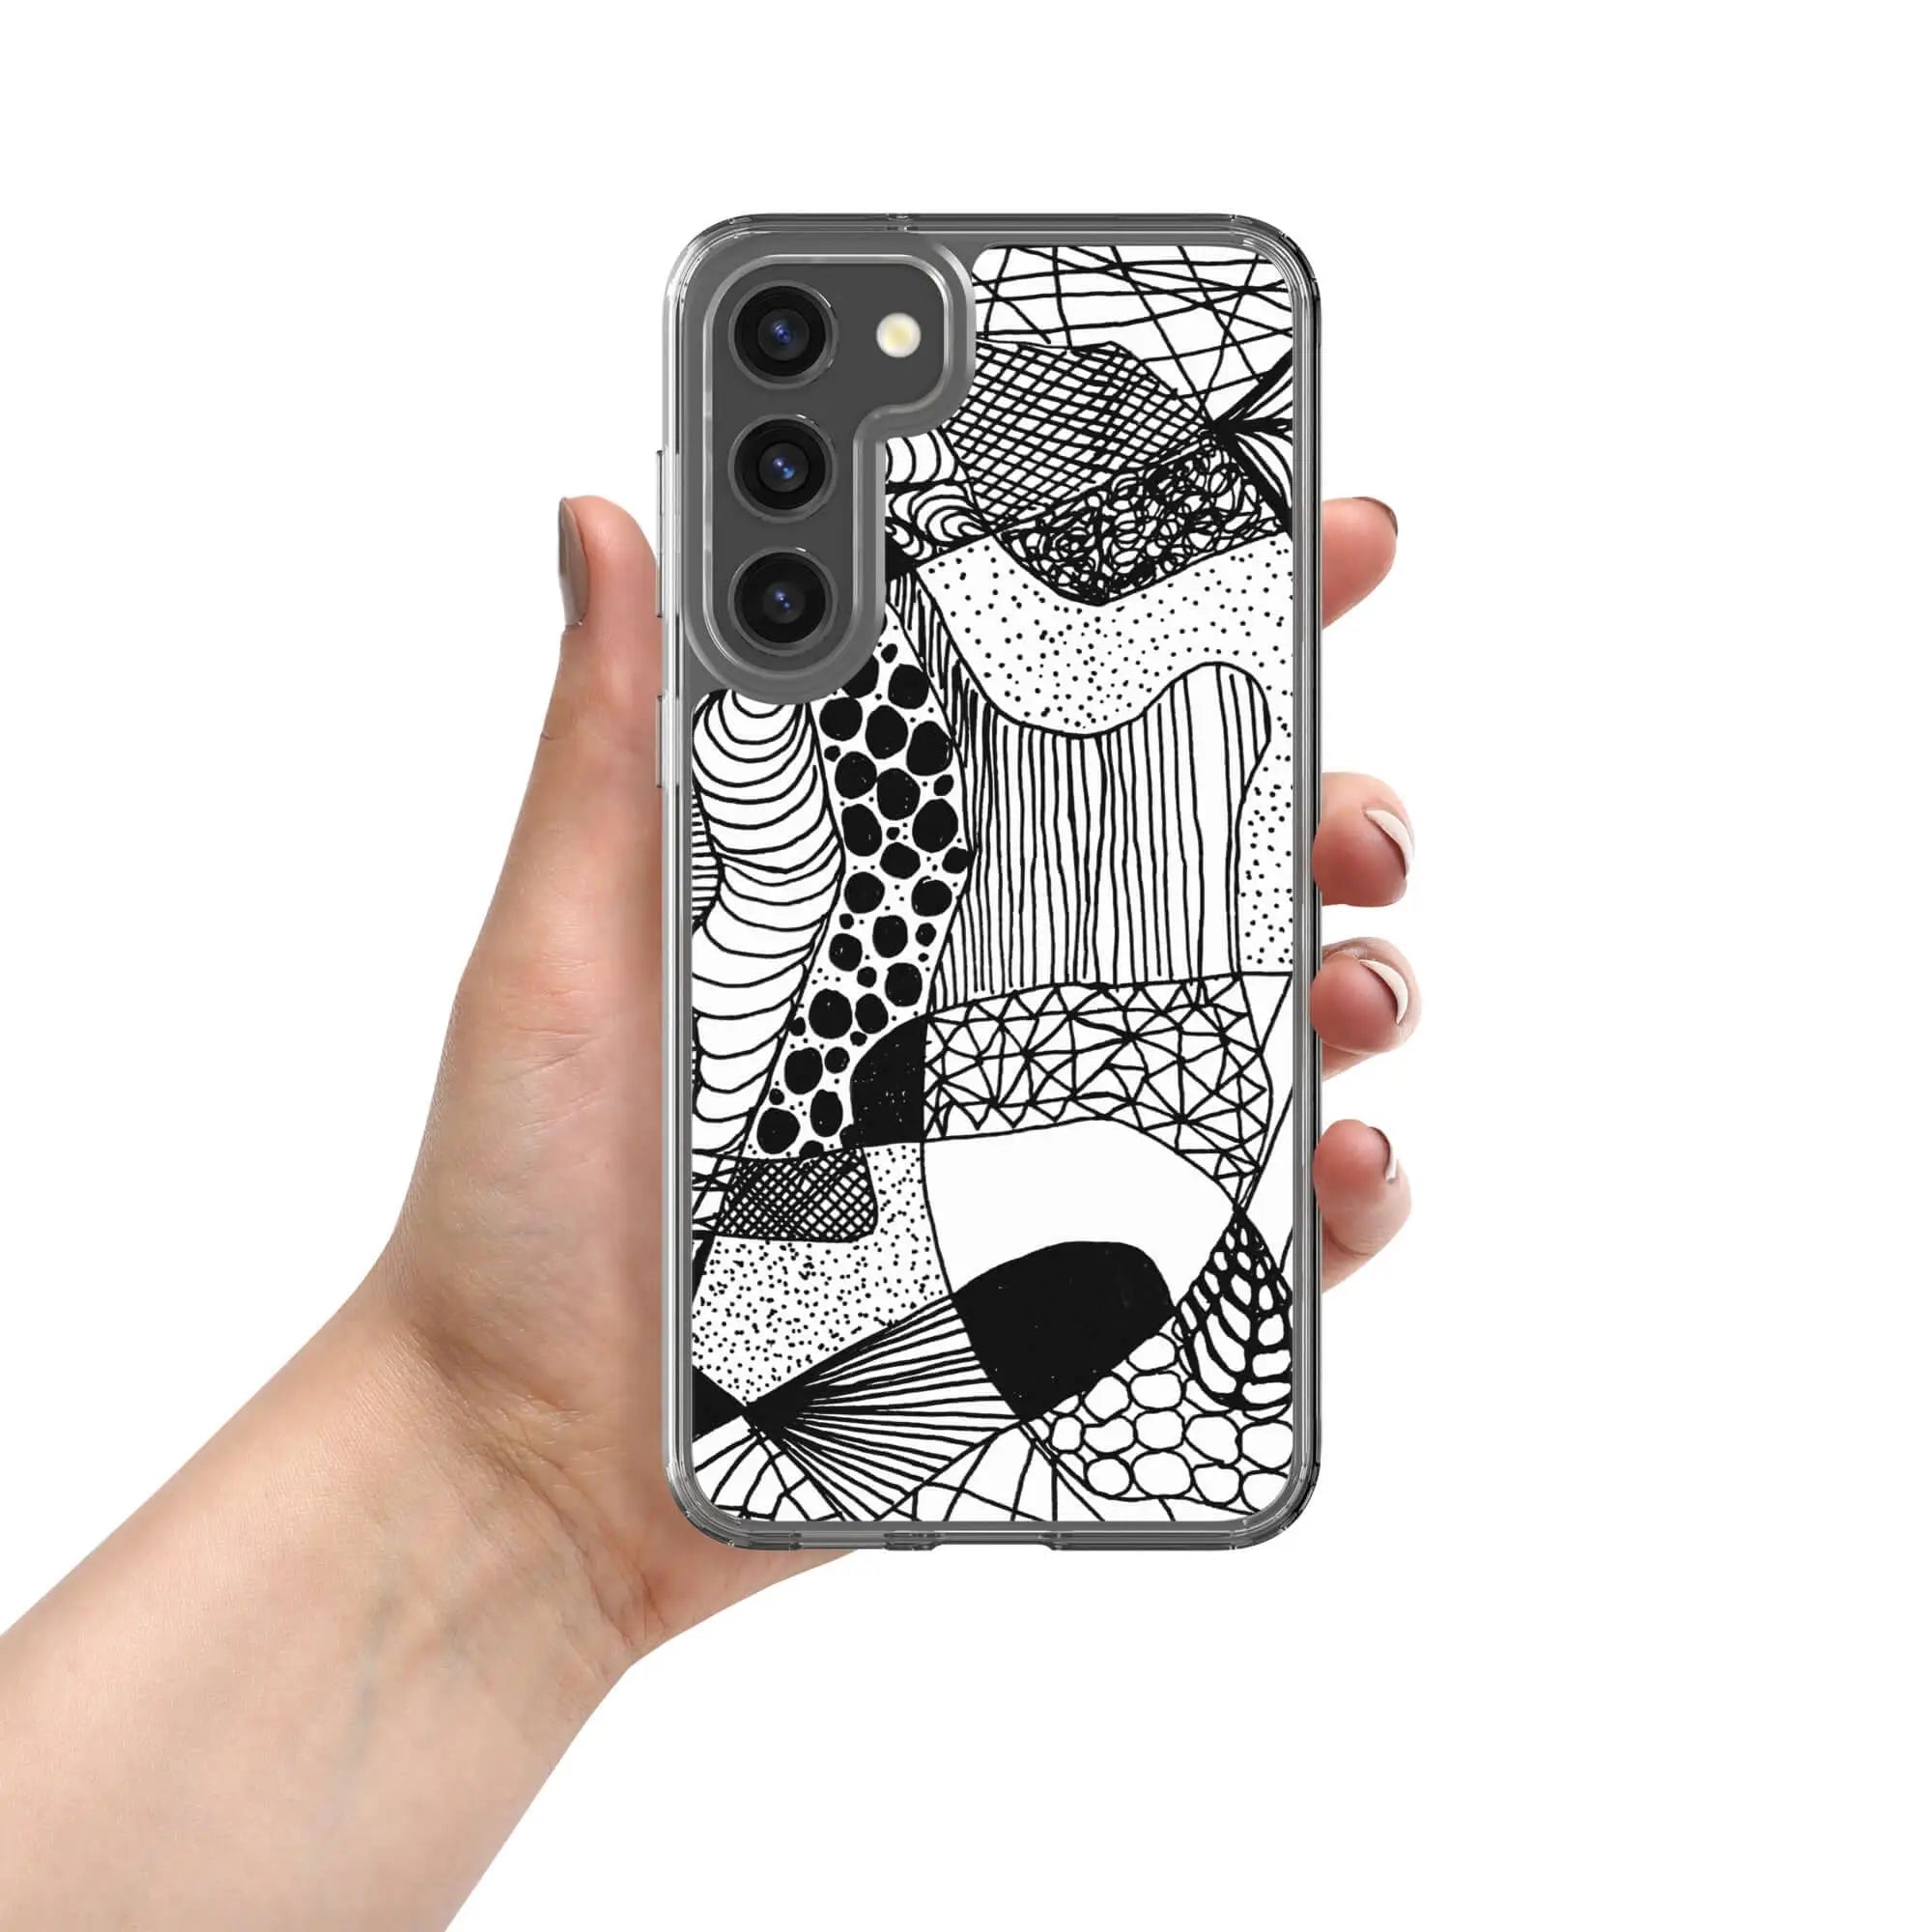 Samsung graphic abstract phone case in black and white held by hand